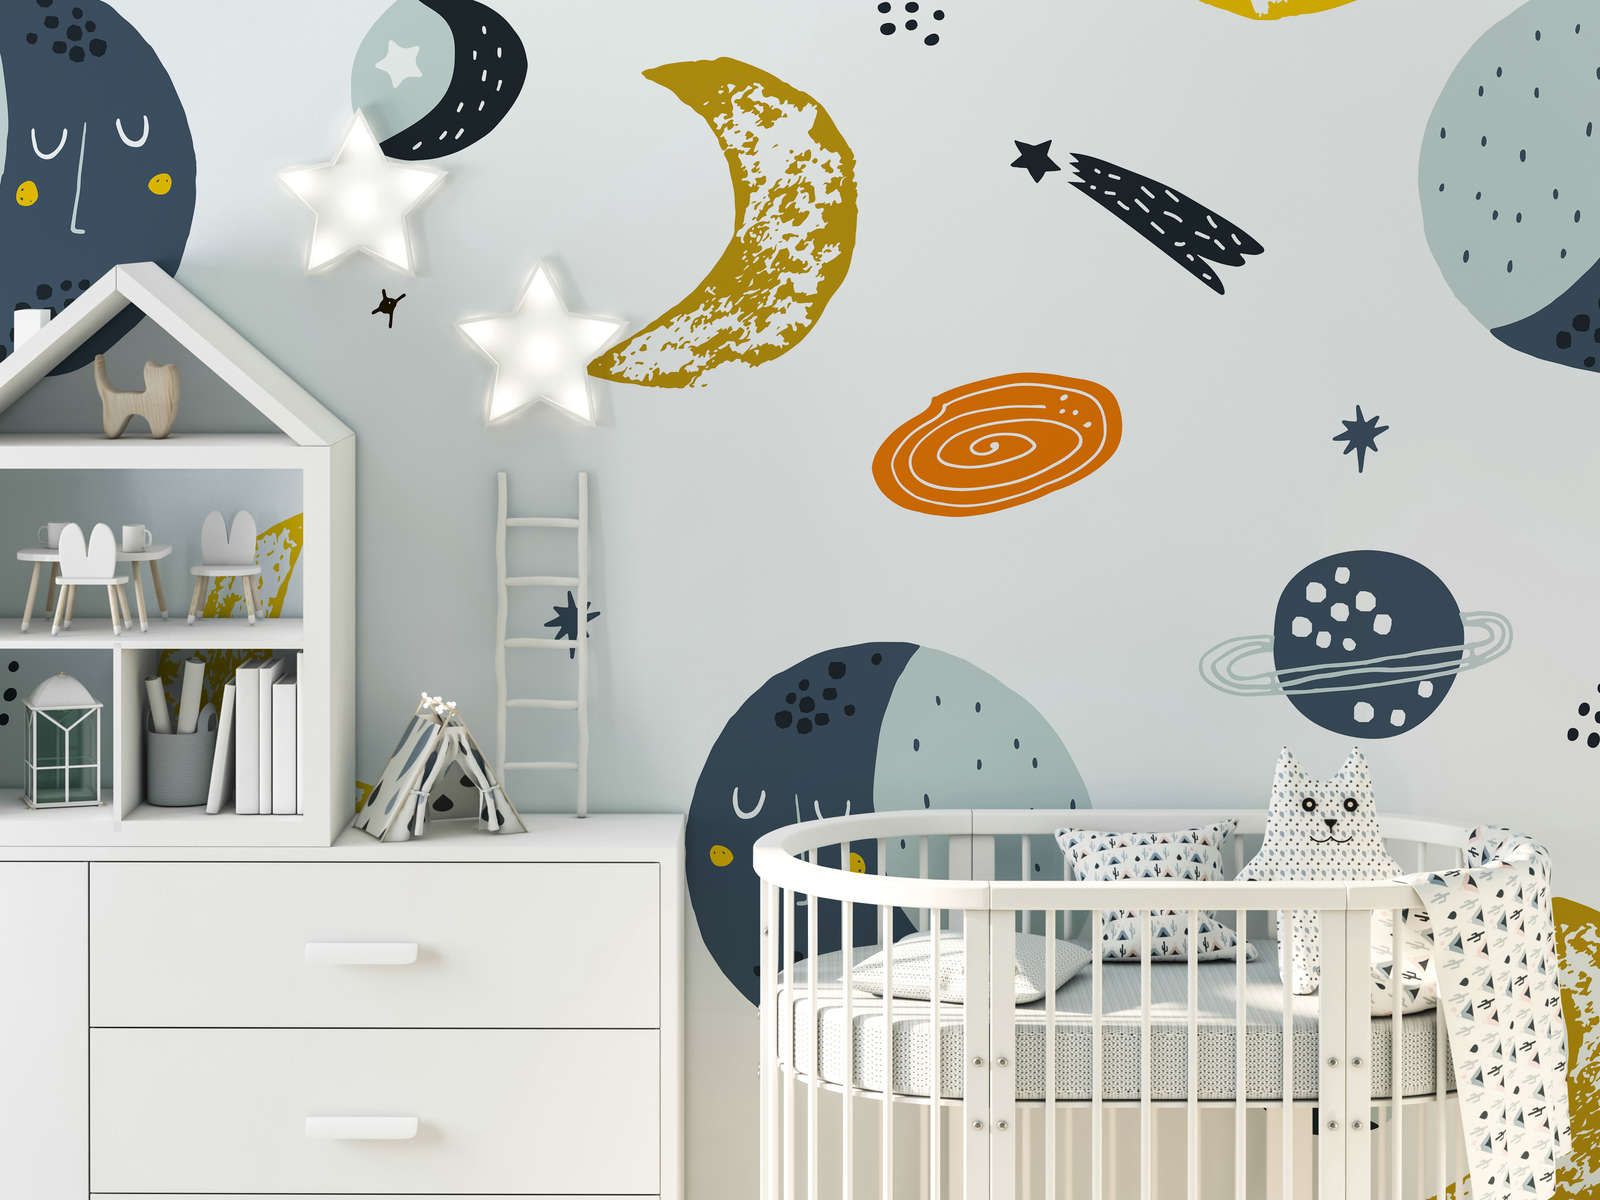             Photo wallpaper with moons and shooting stars - Smooth & matt non-woven
        